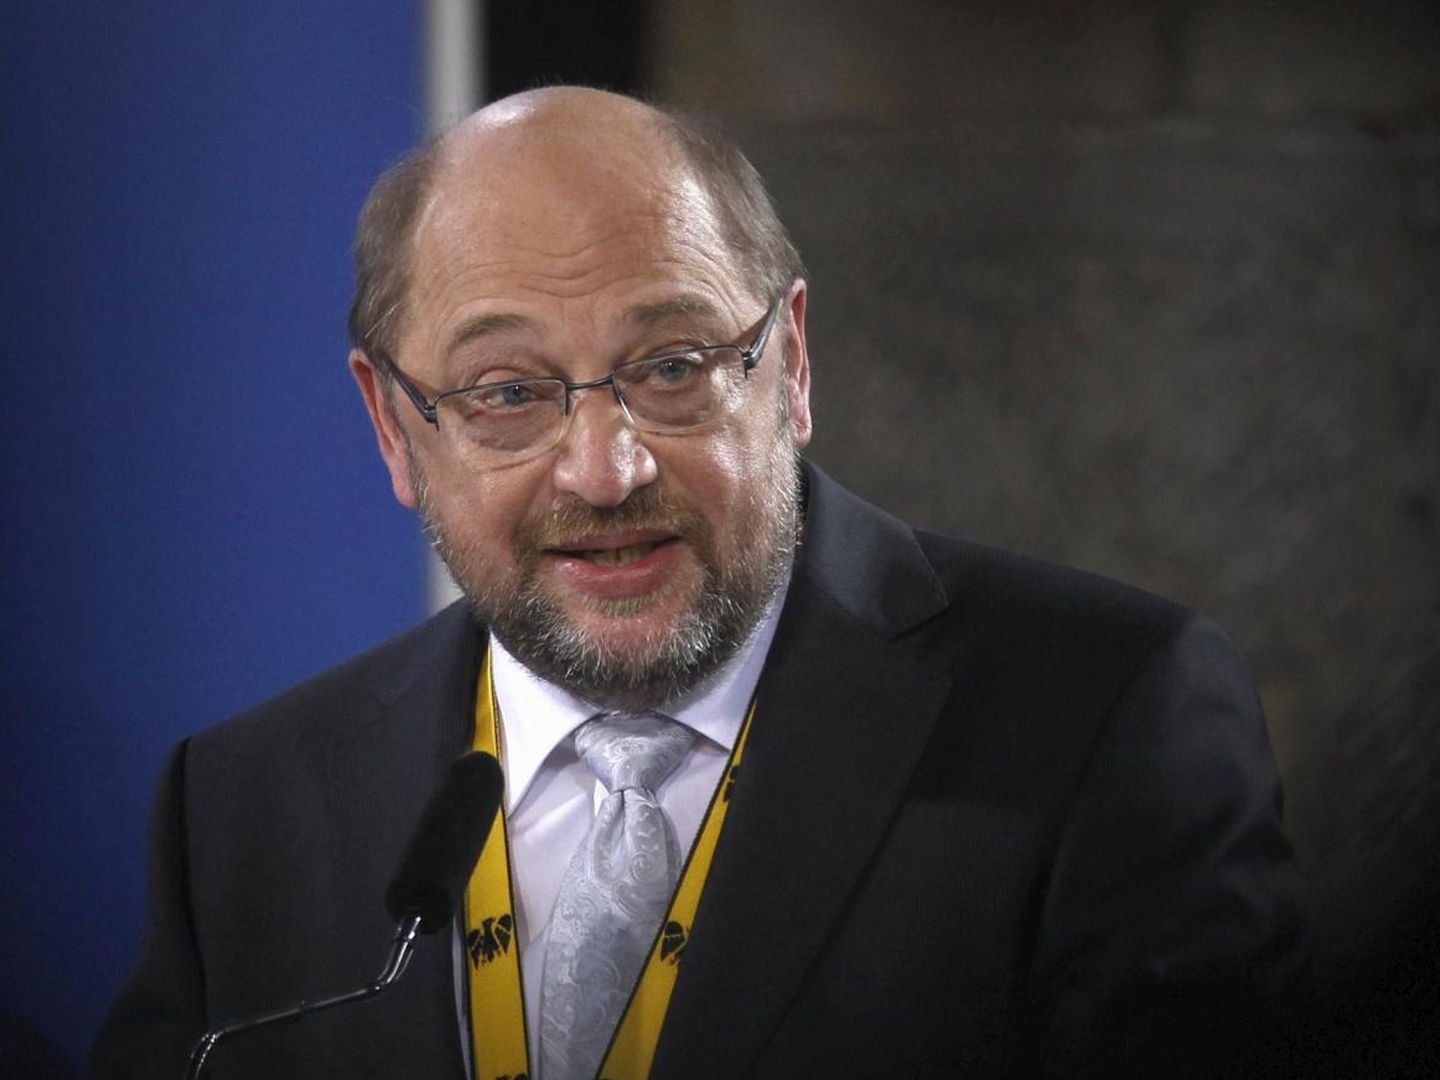 European parliament president schulz delivers a speech after receiving the charlemagne prize 2015 in aachen